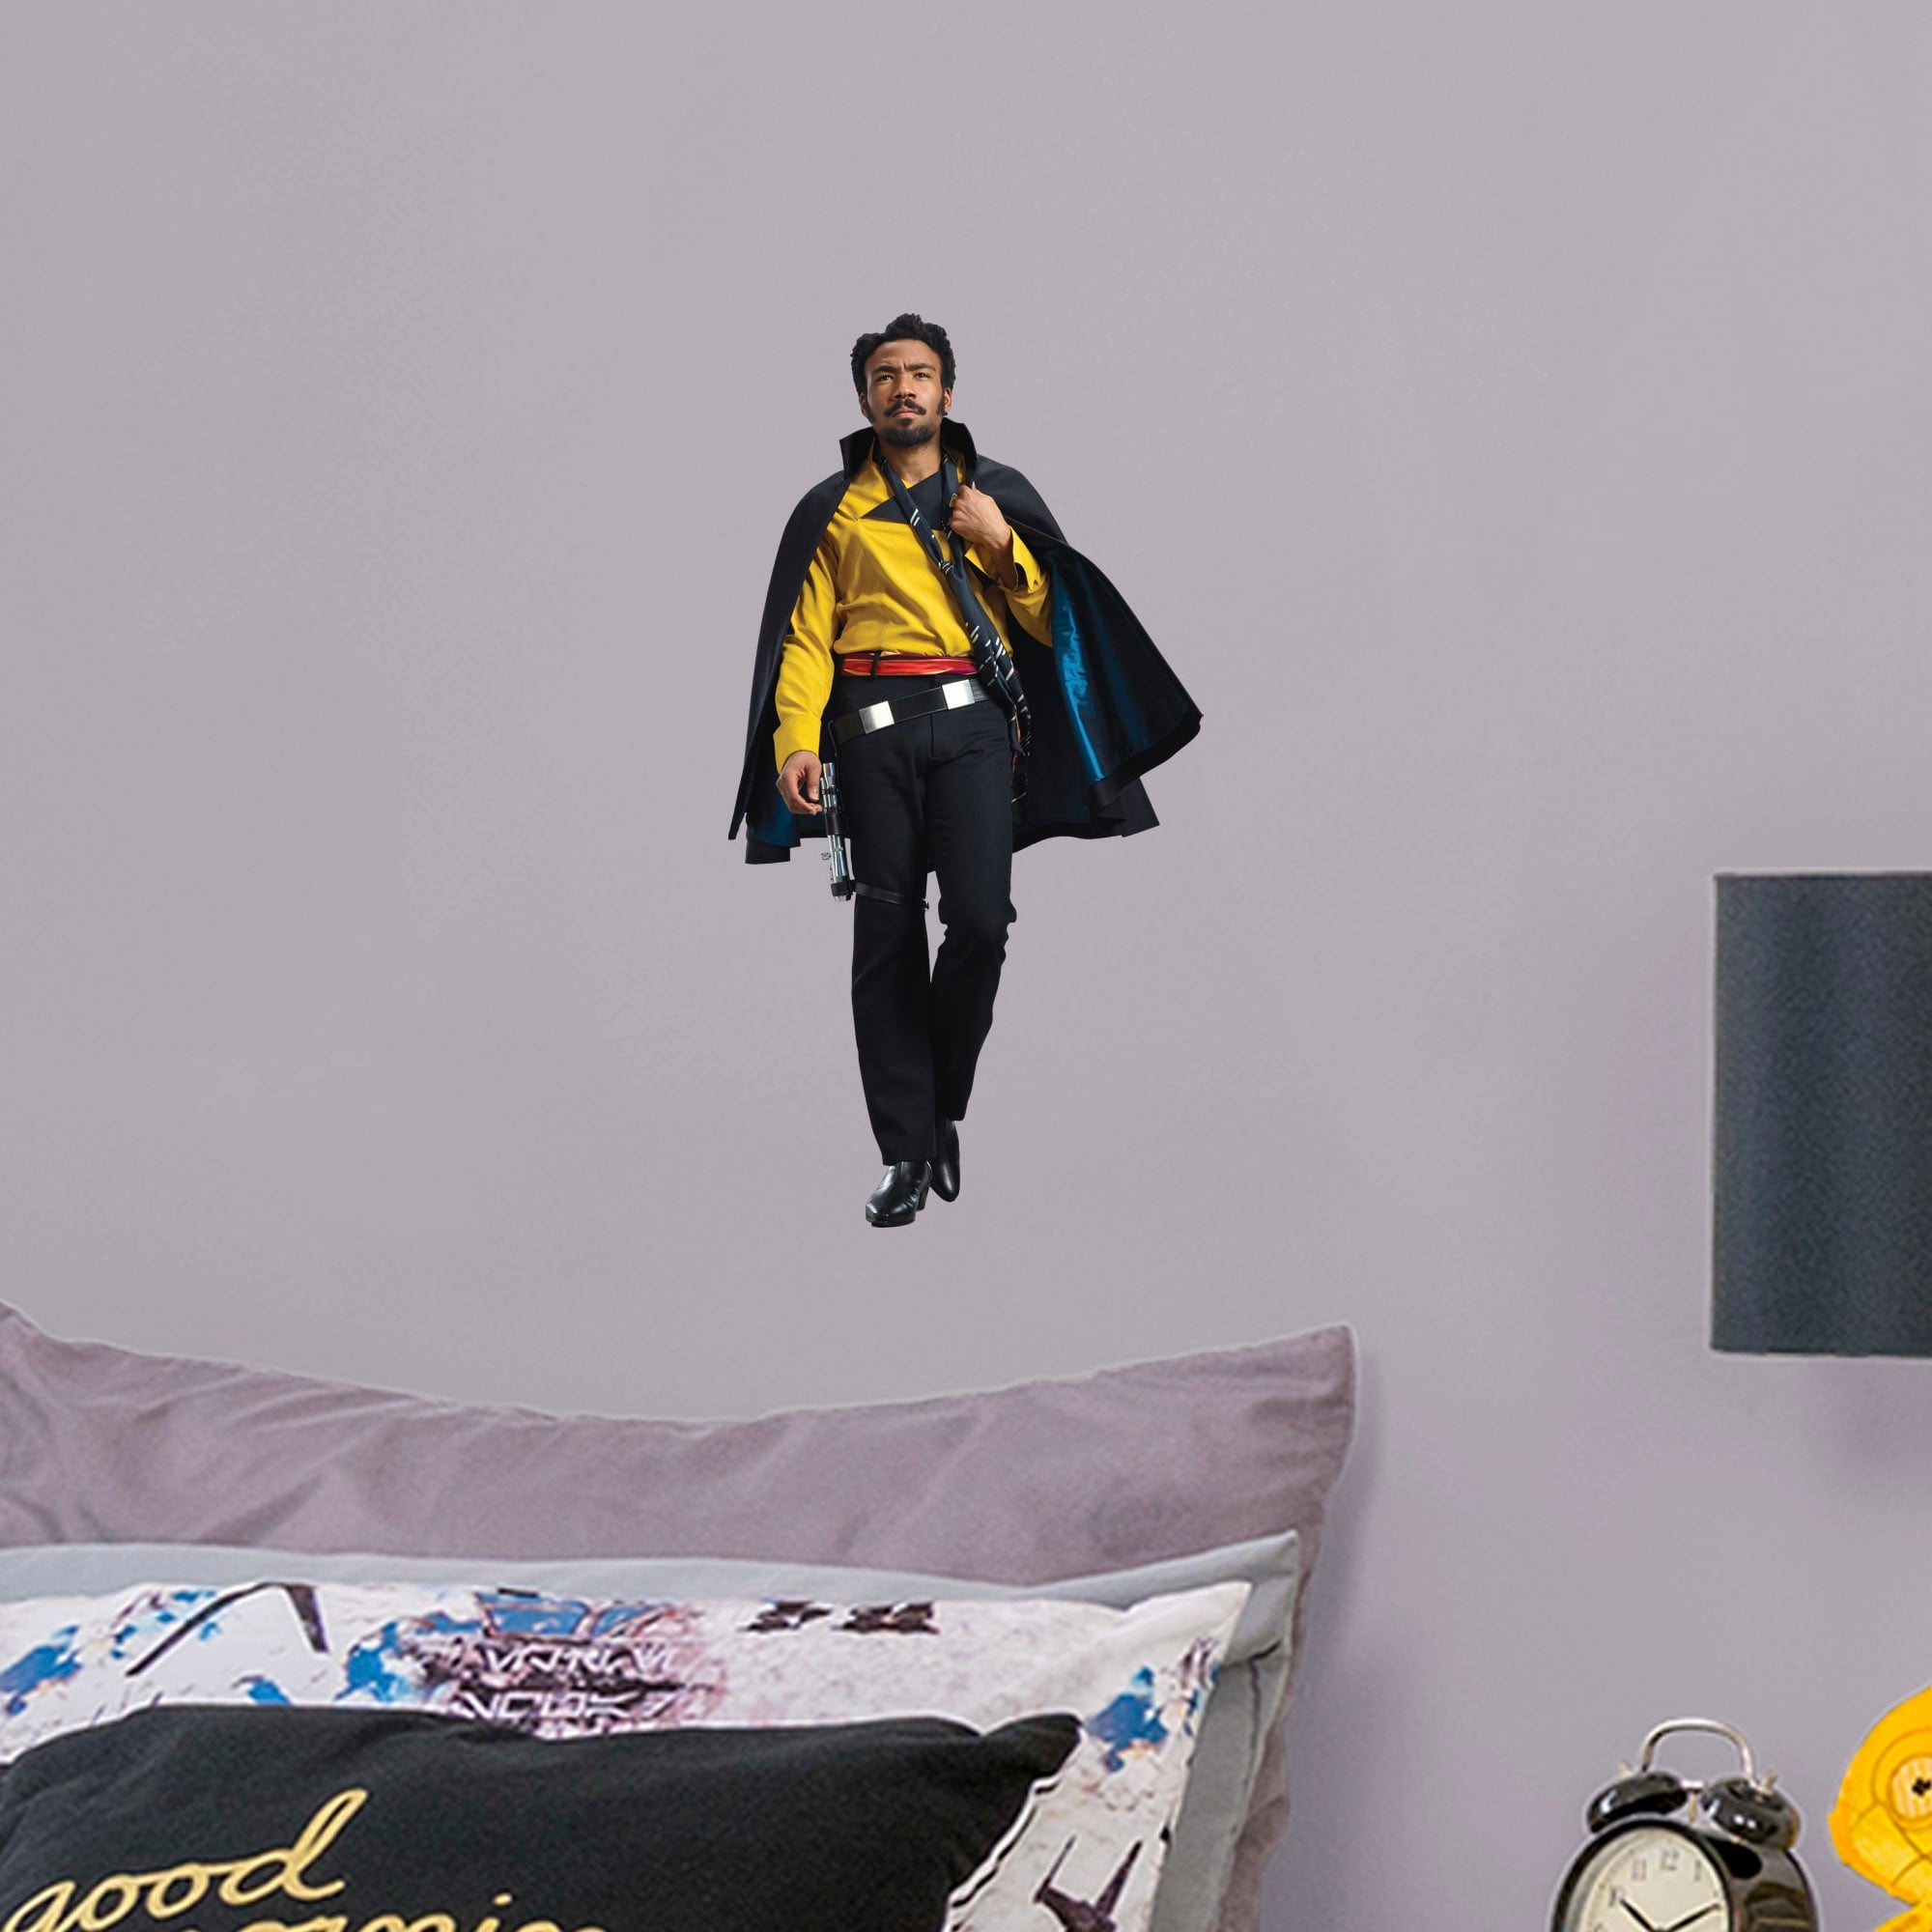 Lando Calrissian - Solo: A Star Wars Story - Officially Licensed Removable Wall Decal Large by Fathead | Vinyl